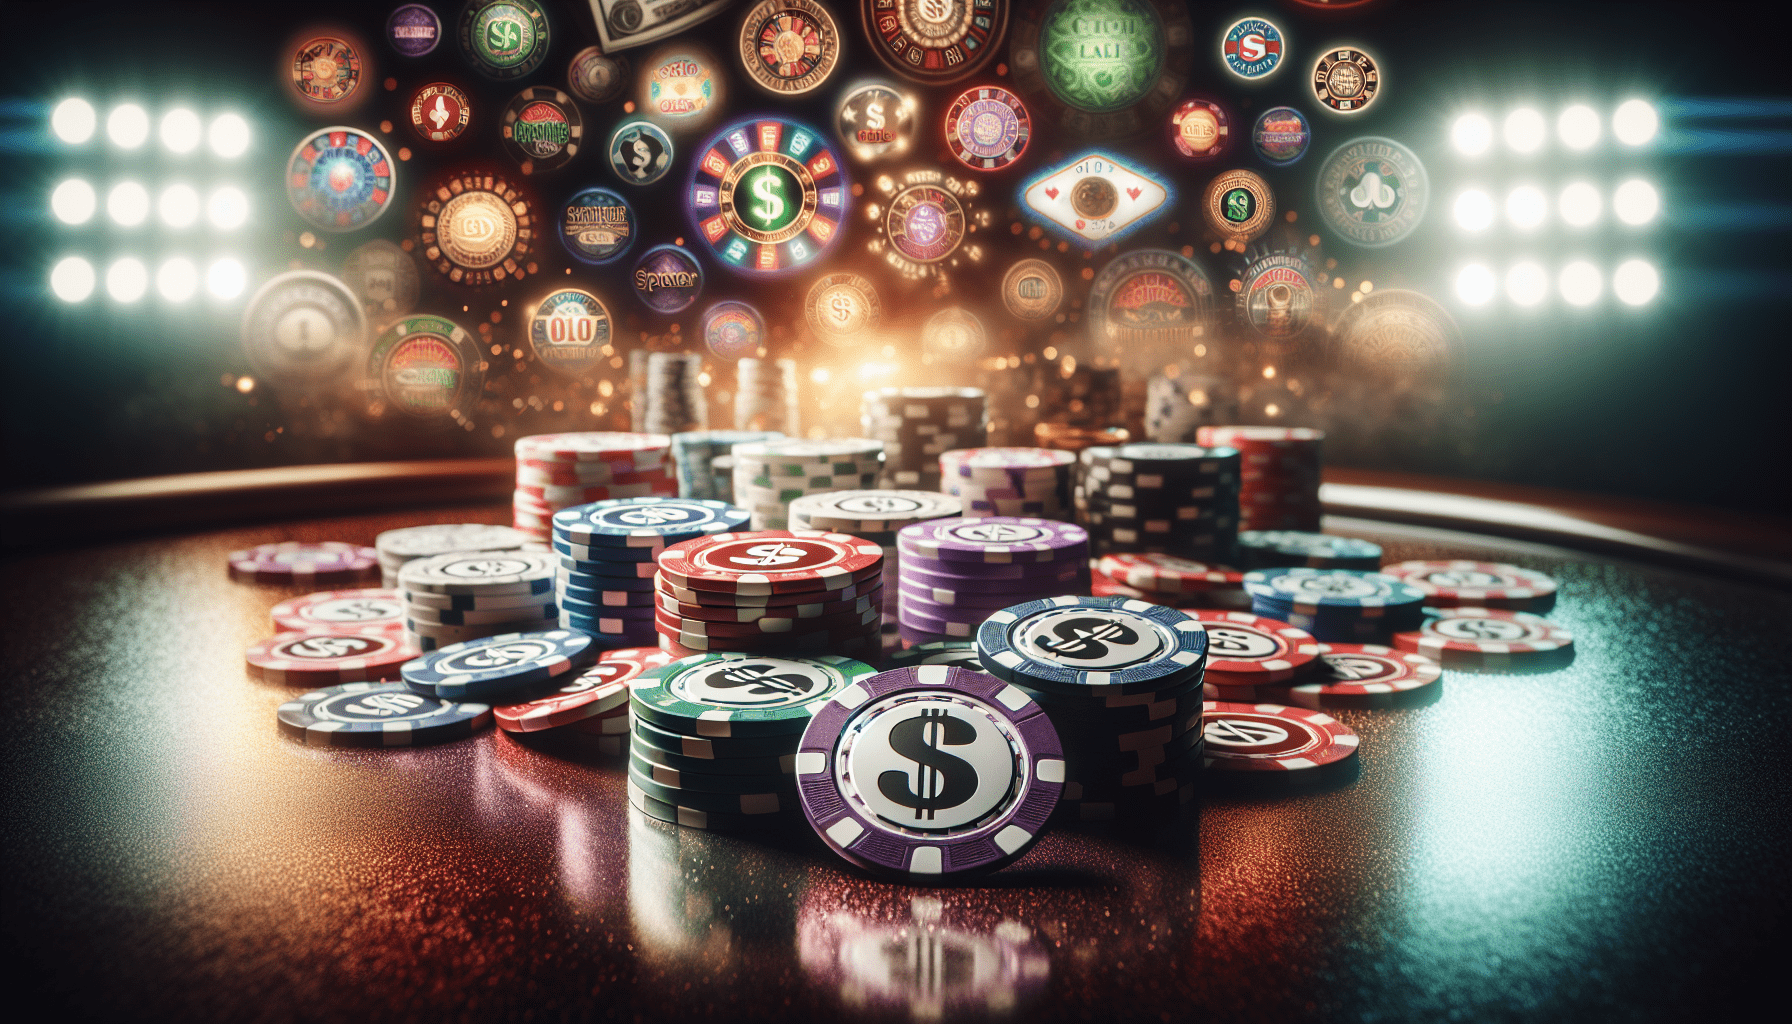 are there any restrictions on casino bonuses